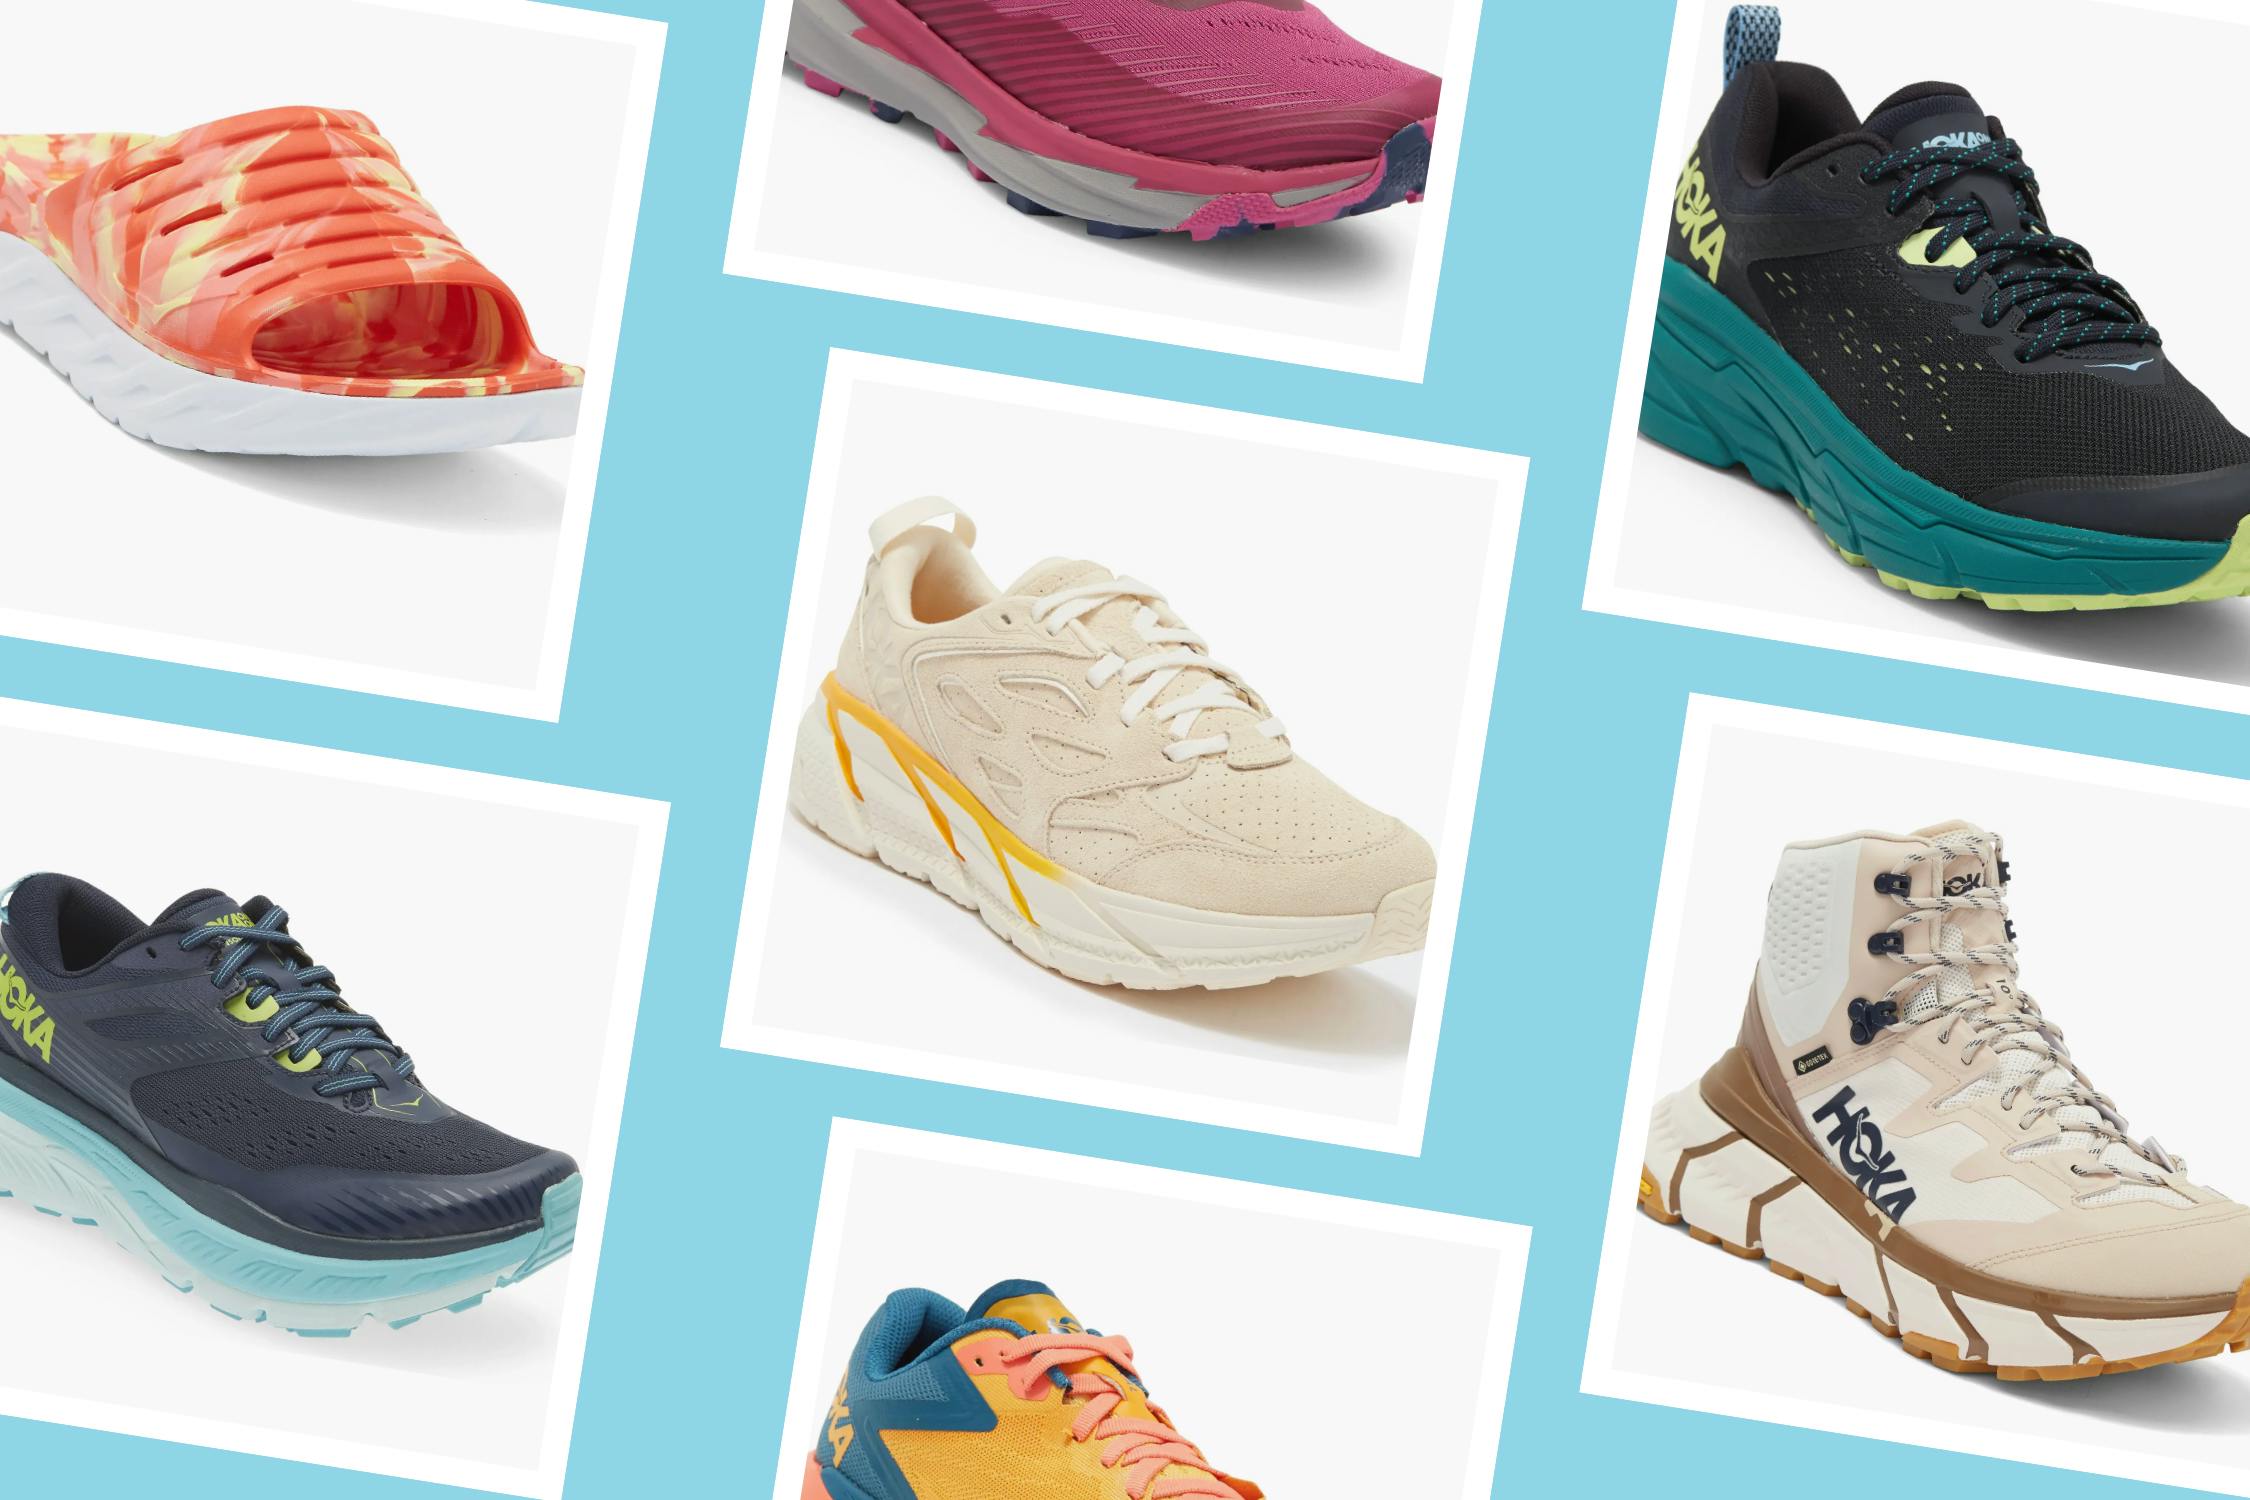 Hoka Shoe Sale at Nordstrom Rack — As Low as $34.97 - The Krazy Coupon Lady